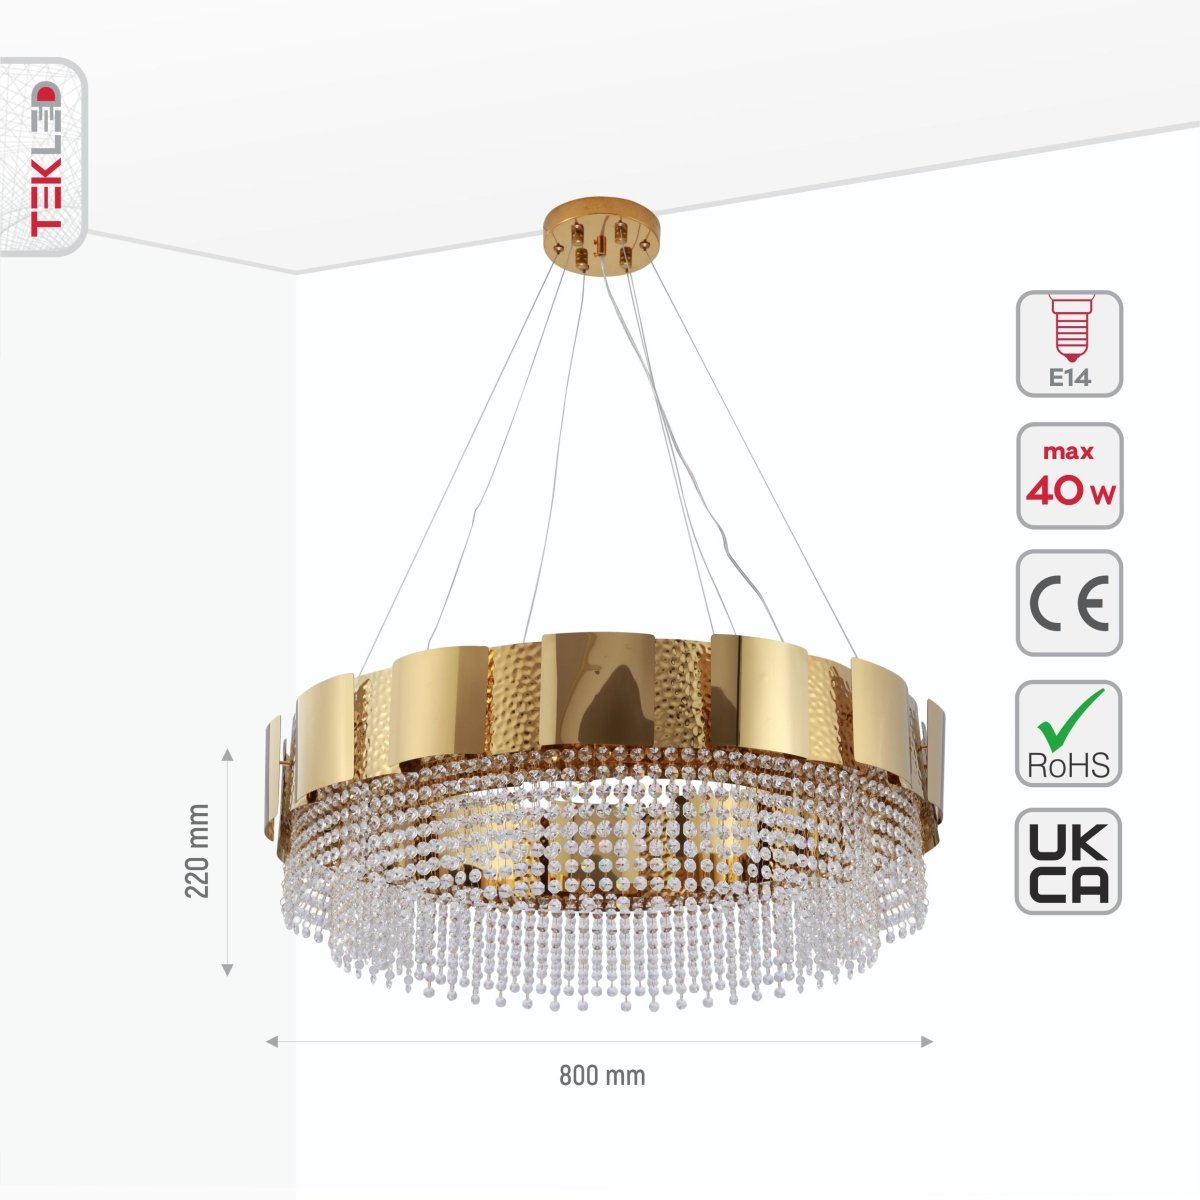 Size and specs of Octagon Crystal Gold Metal Chandelier D800 with 12xE14 Fitting | TEKLED 156-19578